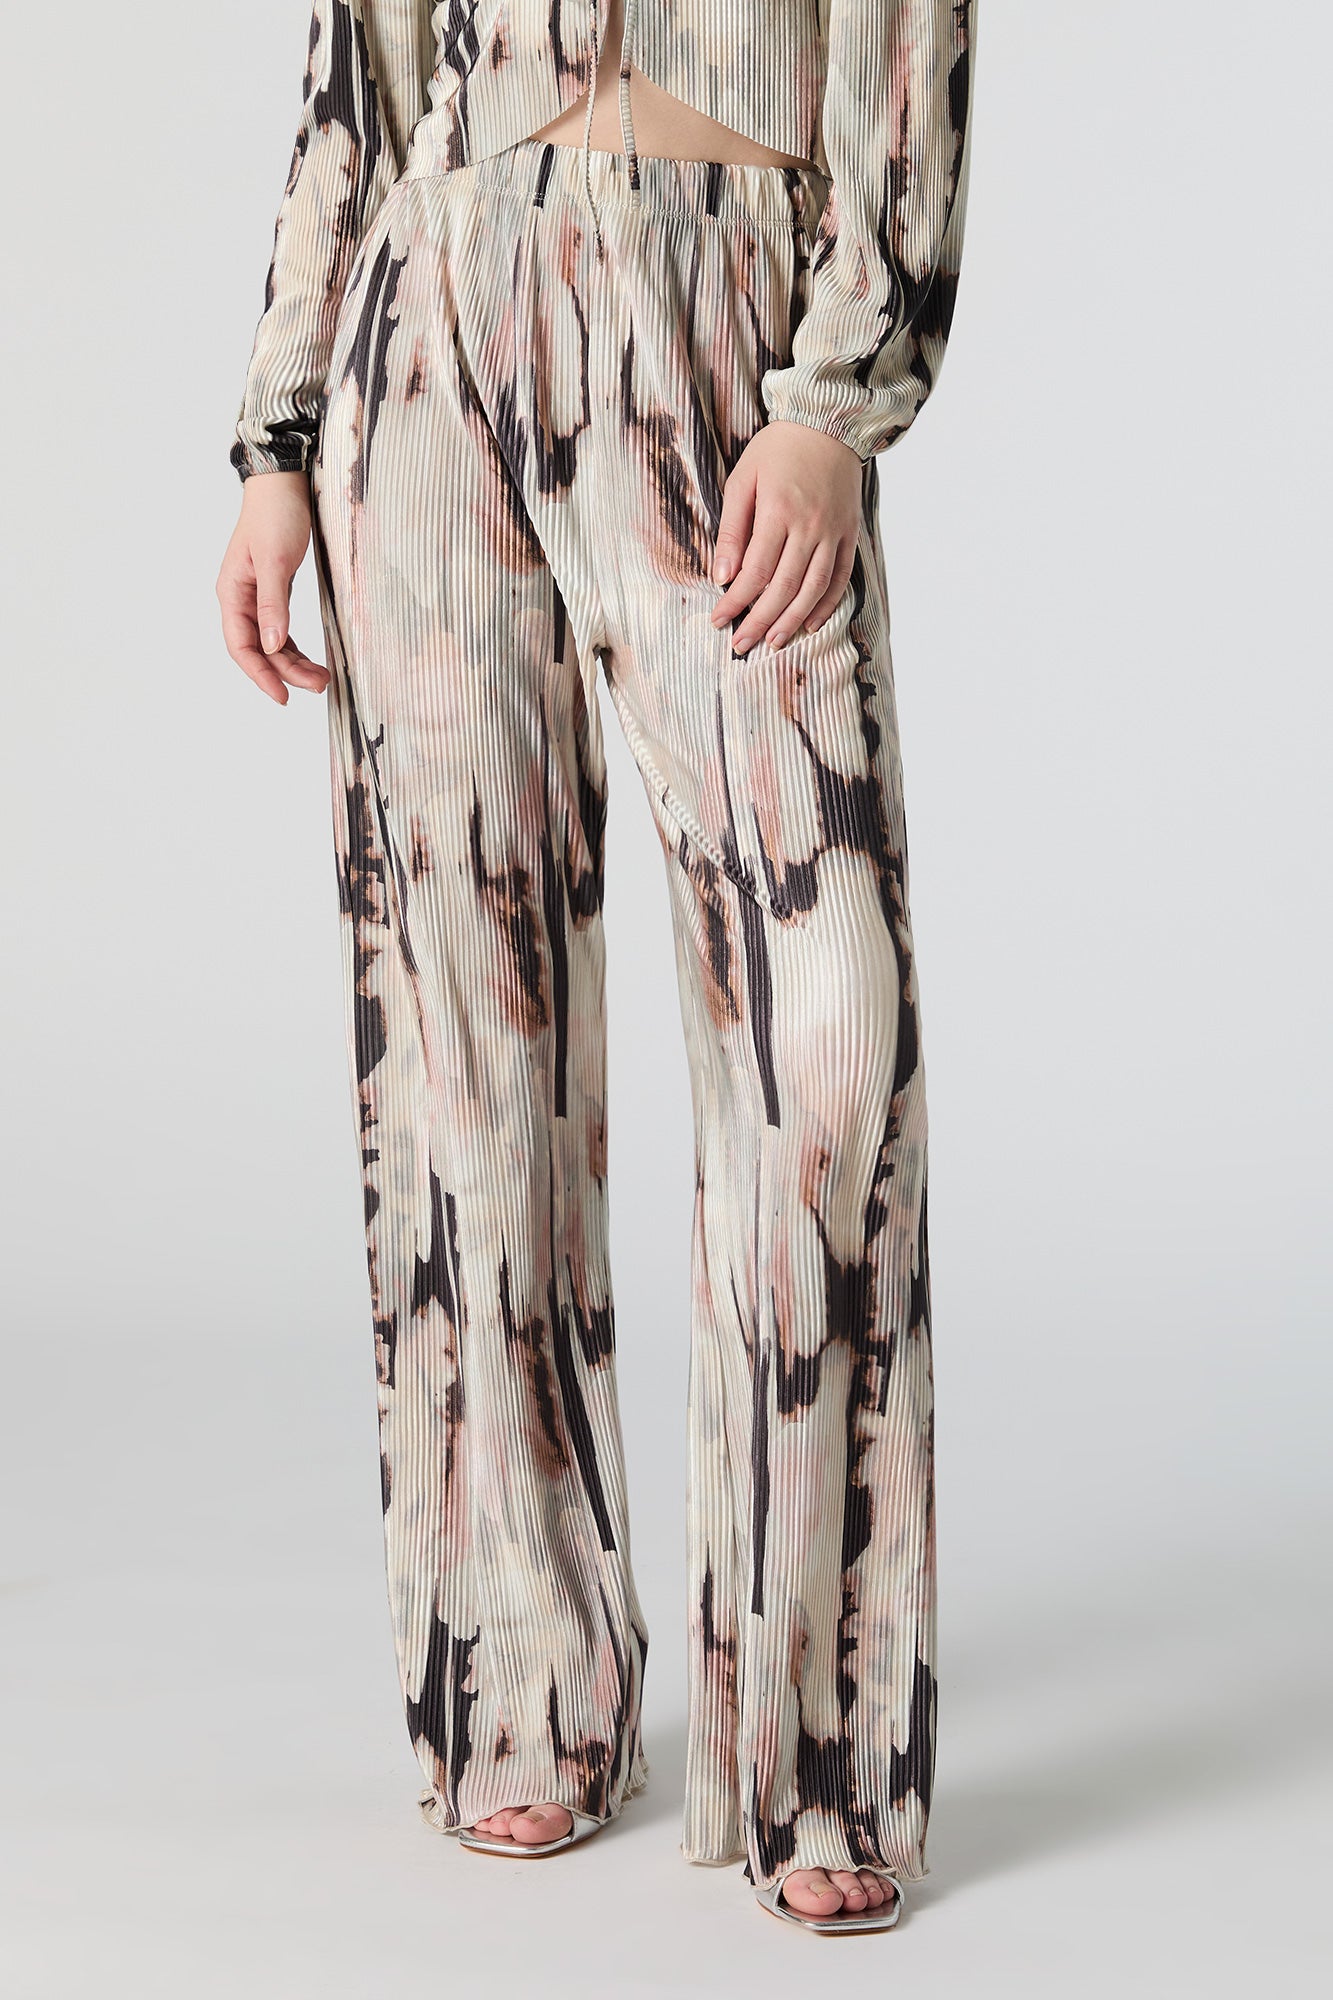 Textured Abstract Print Flowy Wide Leg Pant